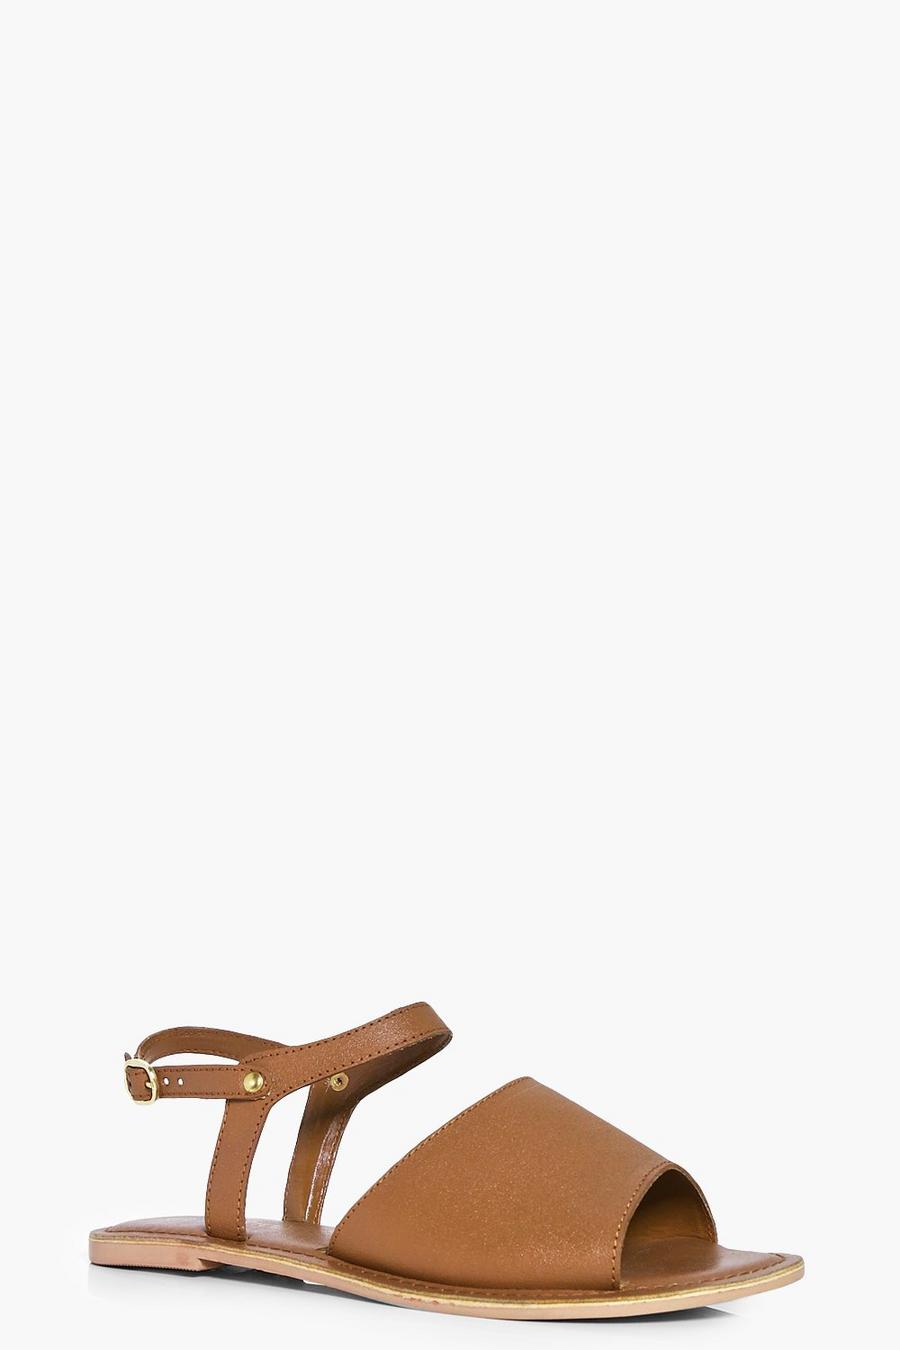 Tan Peeptoe Ankle Strap Leather Flat Mule Sandals image number 1